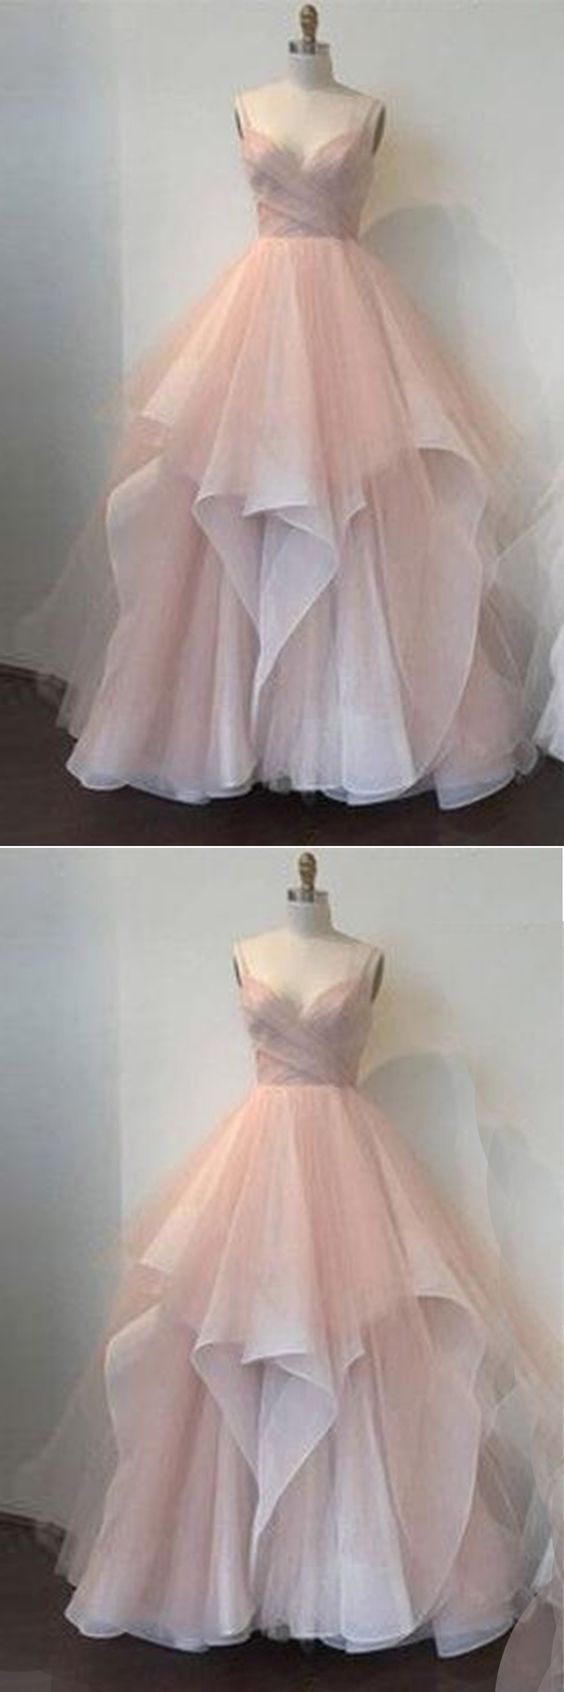 Prom Dresses Pink Lace Backless Long Round Neck Customize Formal Prom ...